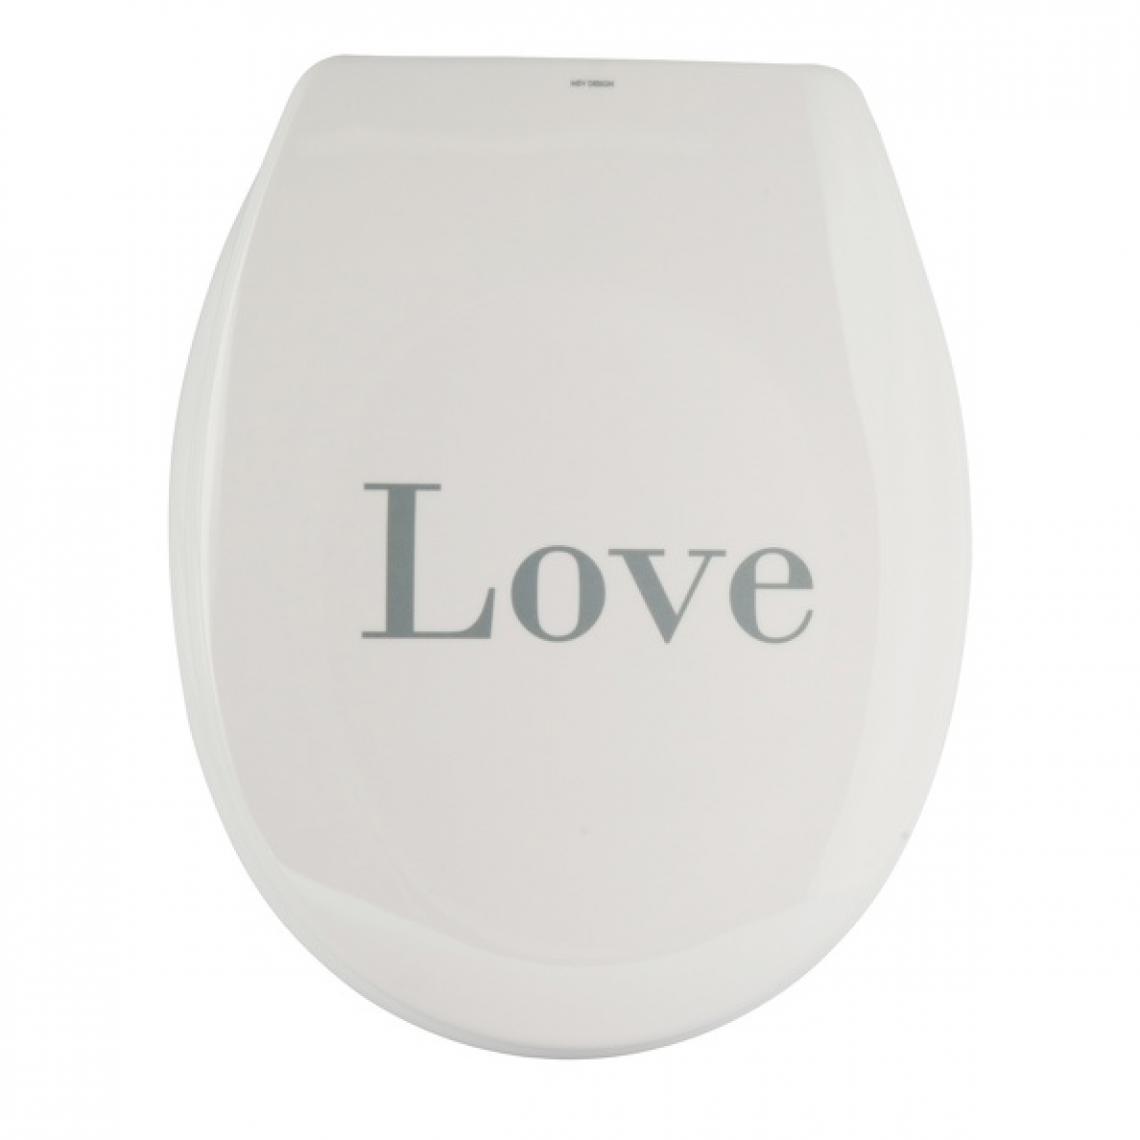 Msv - MSV Abattant Wc Thermo Dur LOVE Gris & Blanc - Charnières PS - Abattant WC